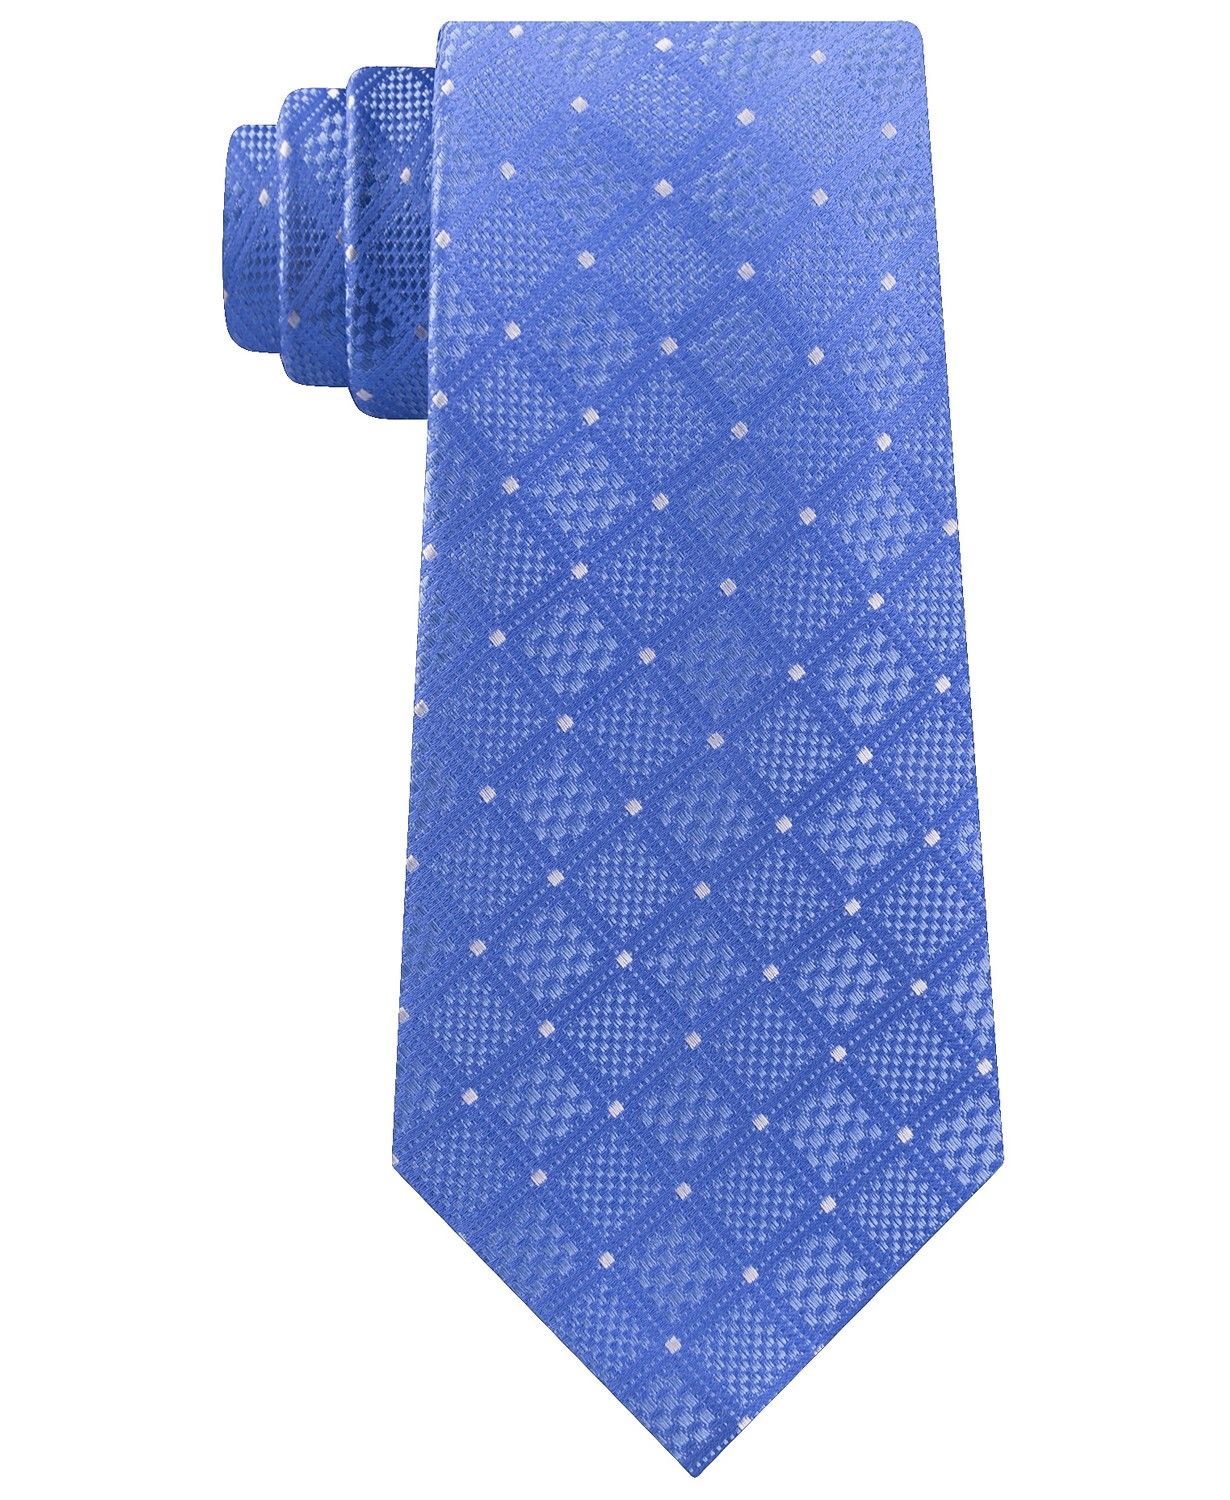 <br>Color: Blues<br>Pattern: Plaids & Checks<br>Style: Neck Tie<br>Width: Skinny (Material: Silk